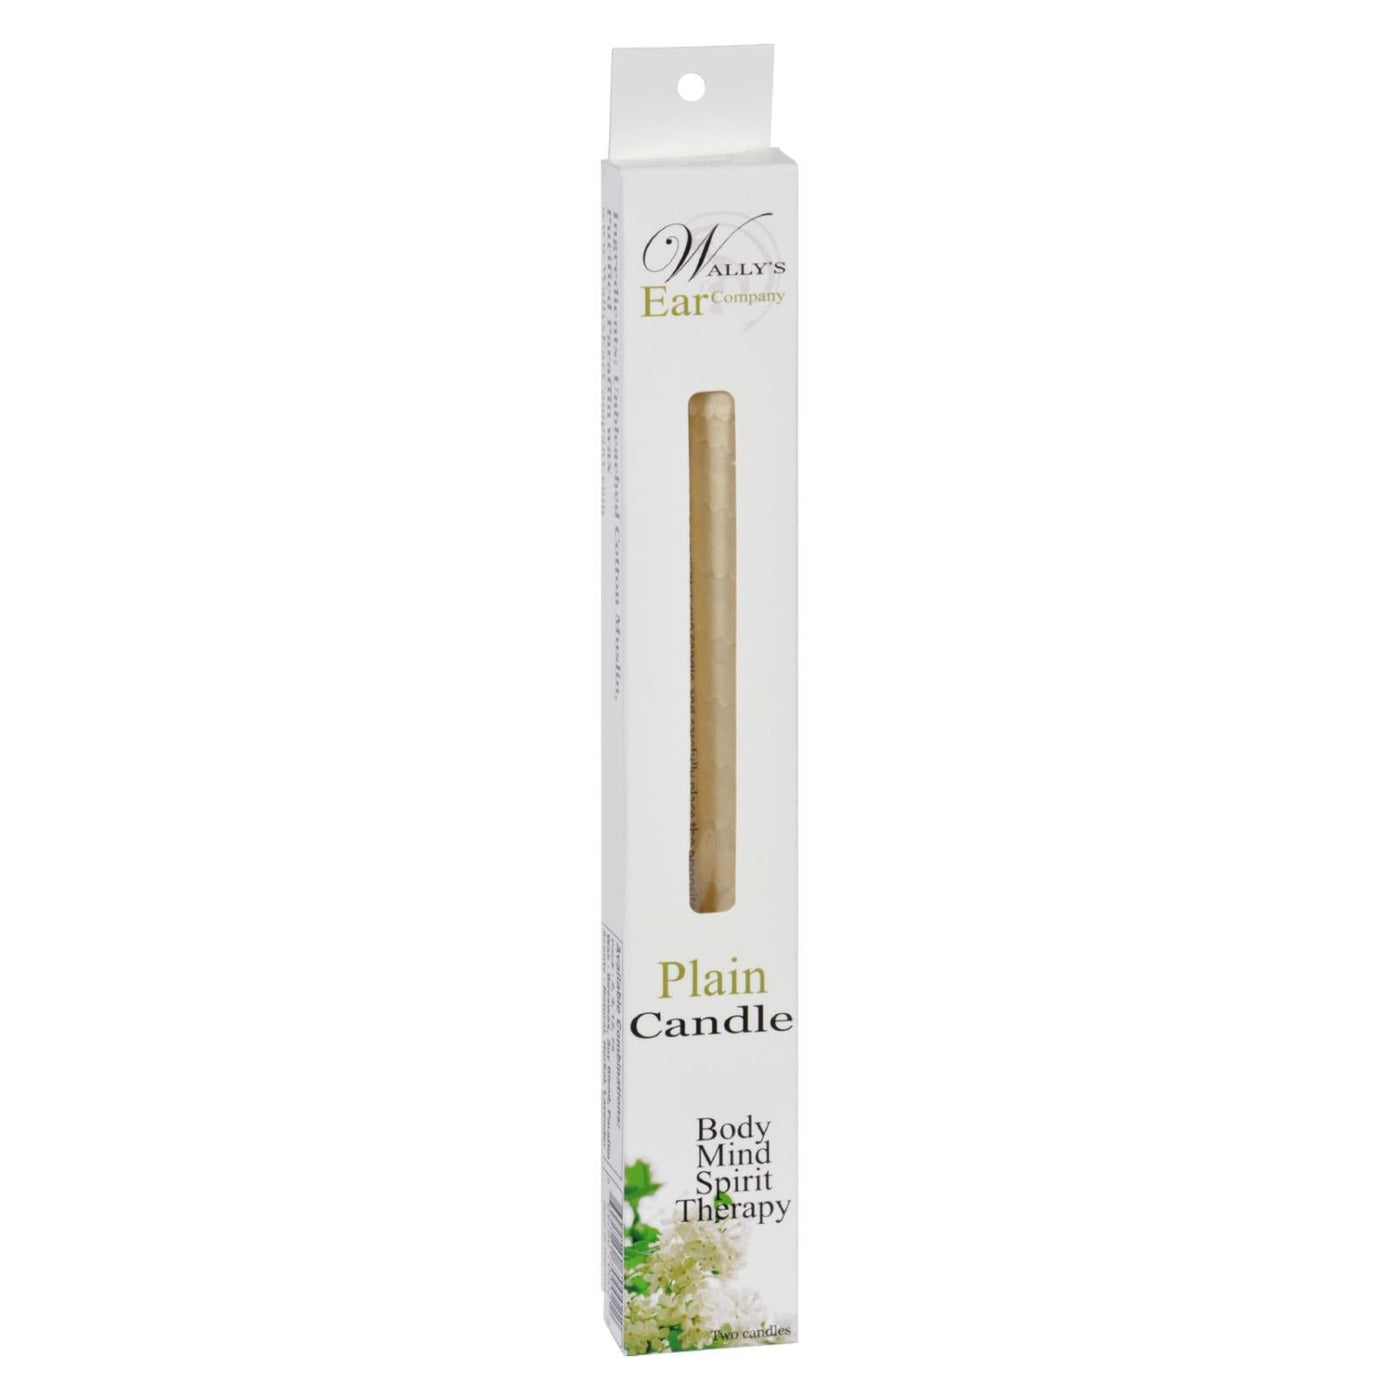 Wally's Candle Plain - 2 Candles | OnlyNaturals.us